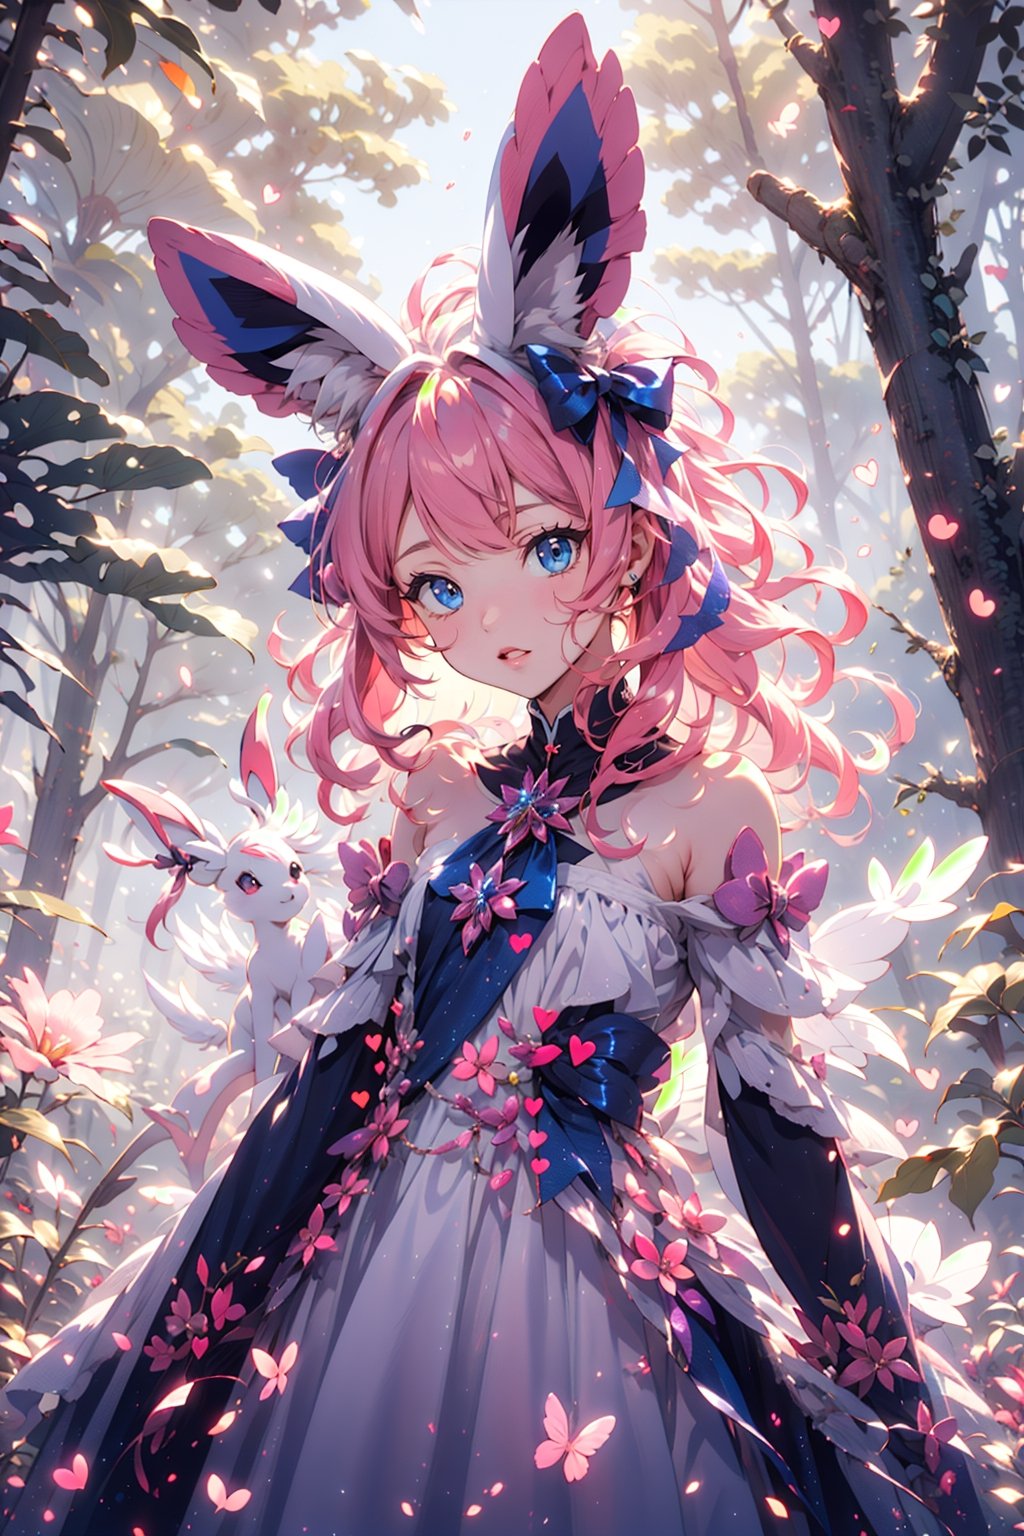 sylveon, human, pink hair, ribbons, fairy-like appearance, long pink hair, blue eyes, frilly outfit, hearts, white dress,coloured glaze,fairy, daytime, forest background, wide angle, small sylveon on shoulder, long wavy hair